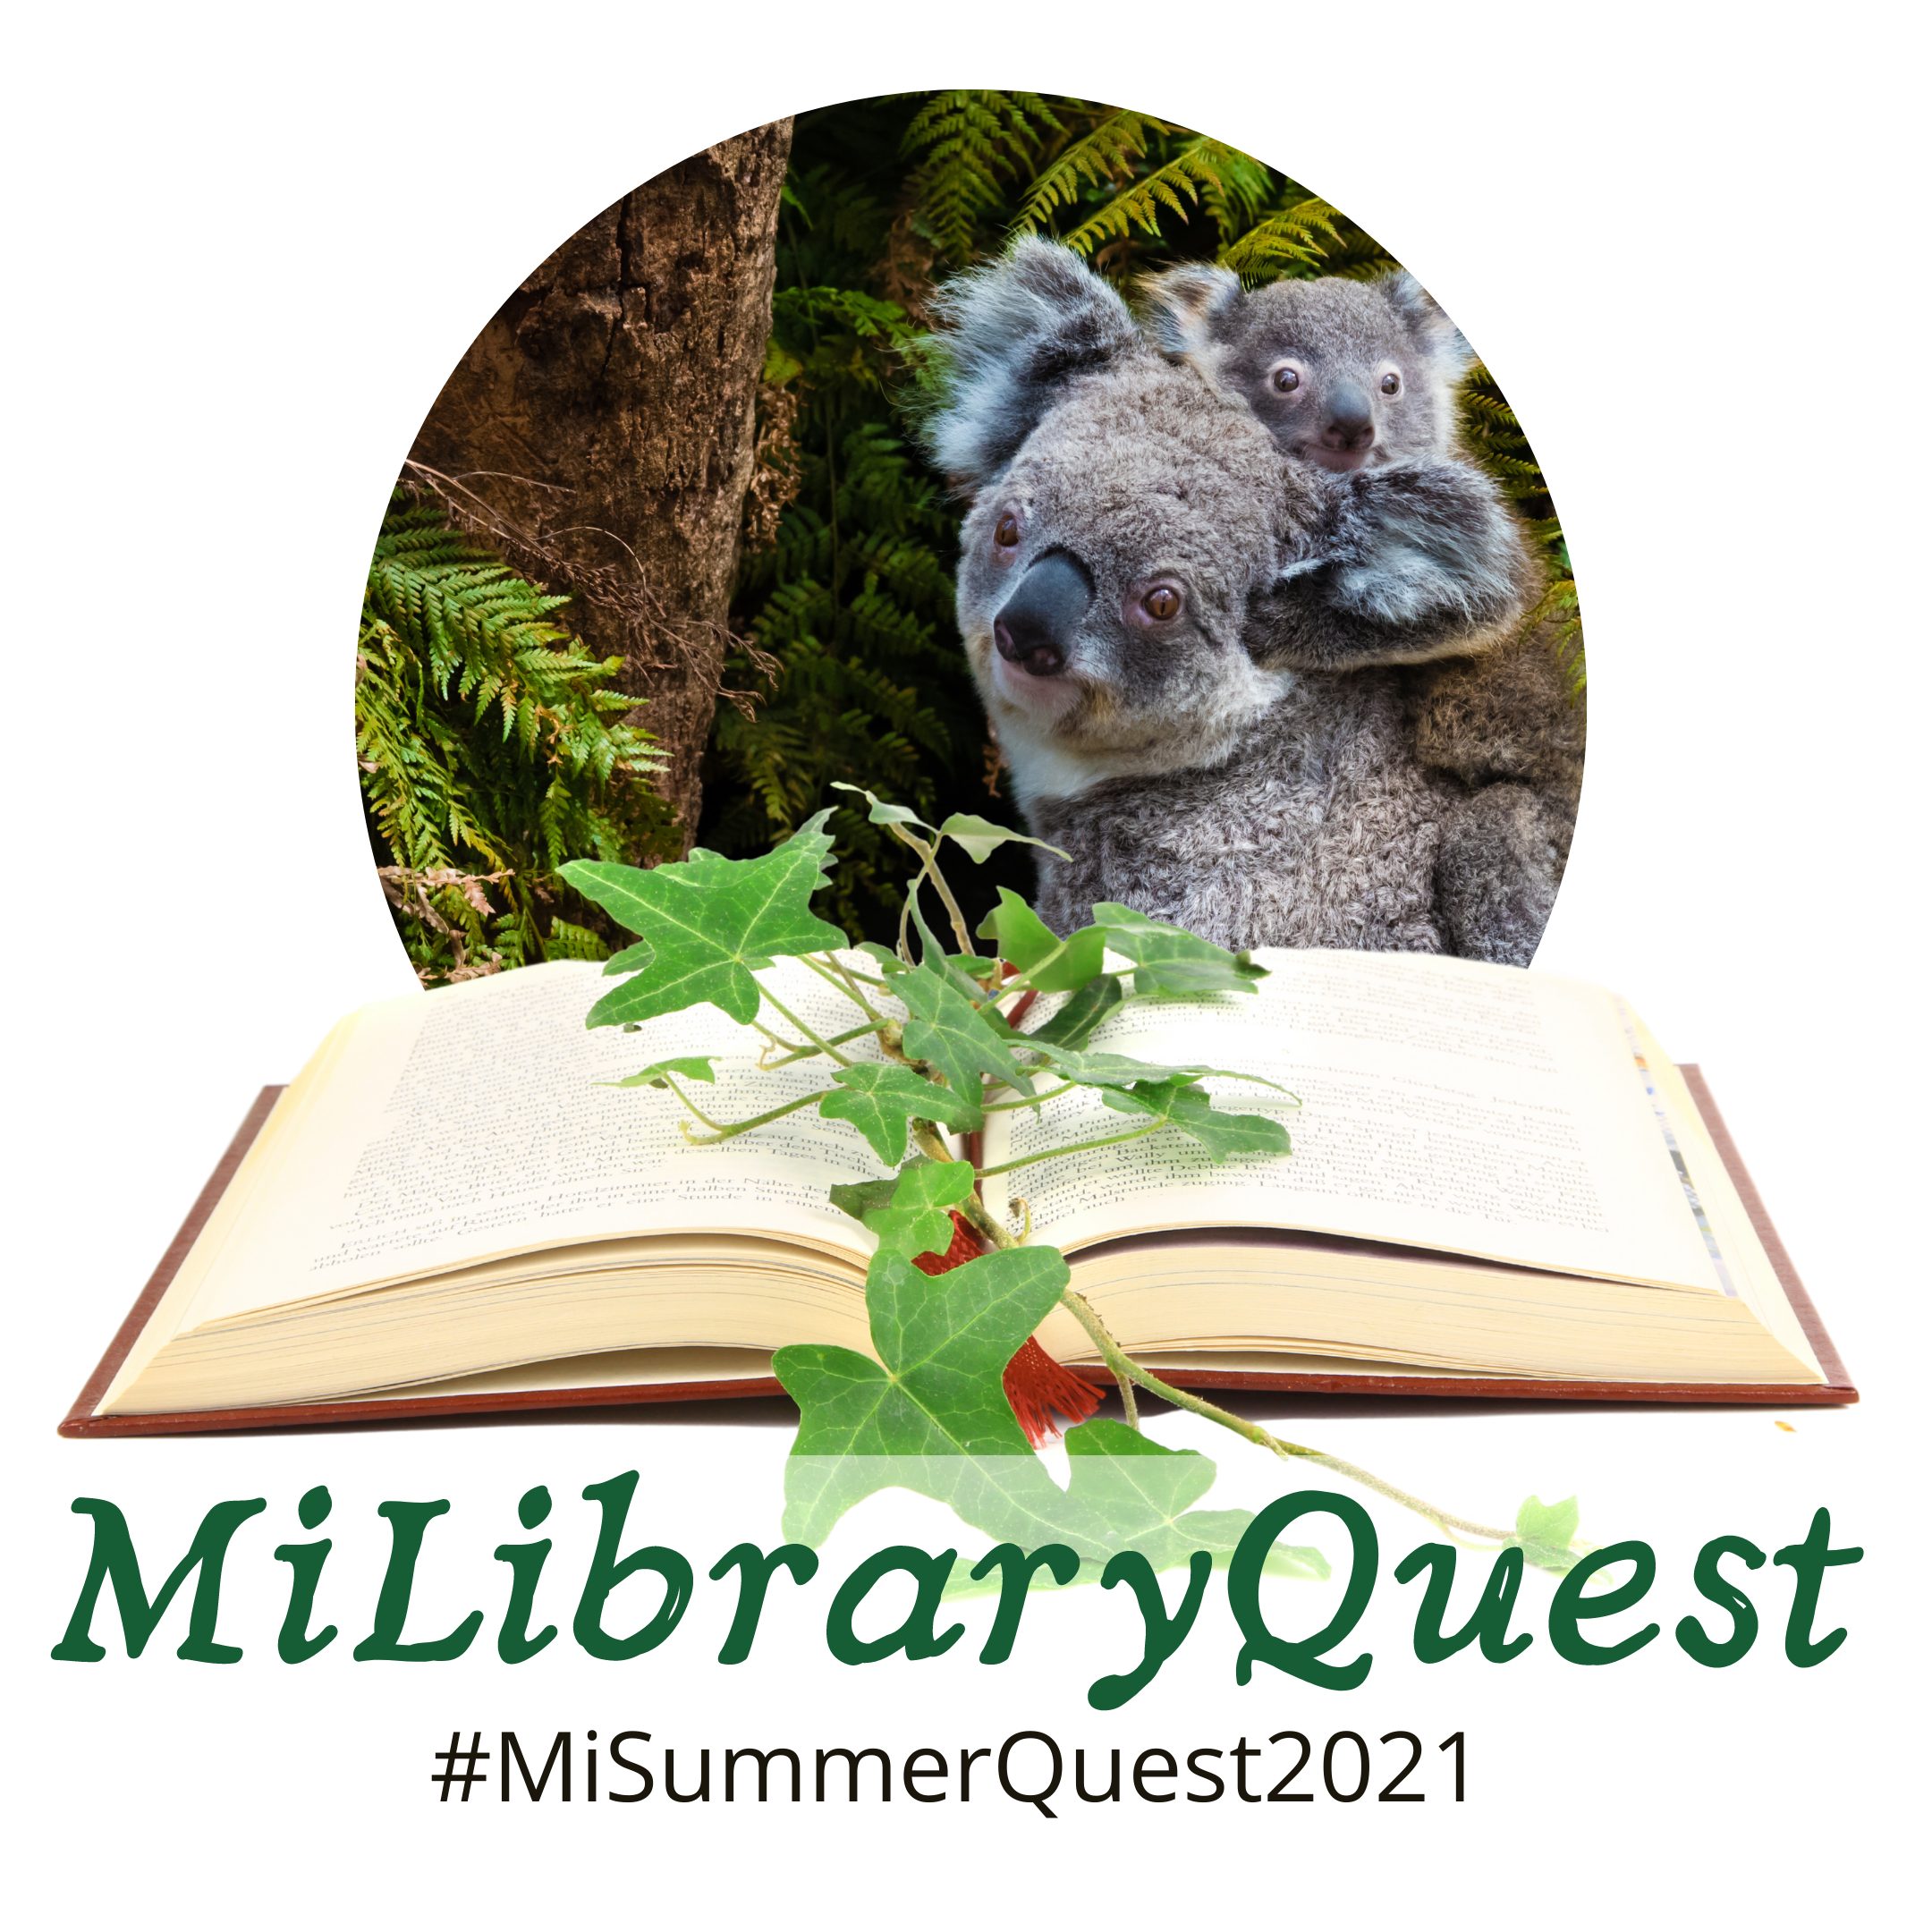 MiLibraryQuest logo with koalas, an open book, and the text #MiLibraryQuest2021 